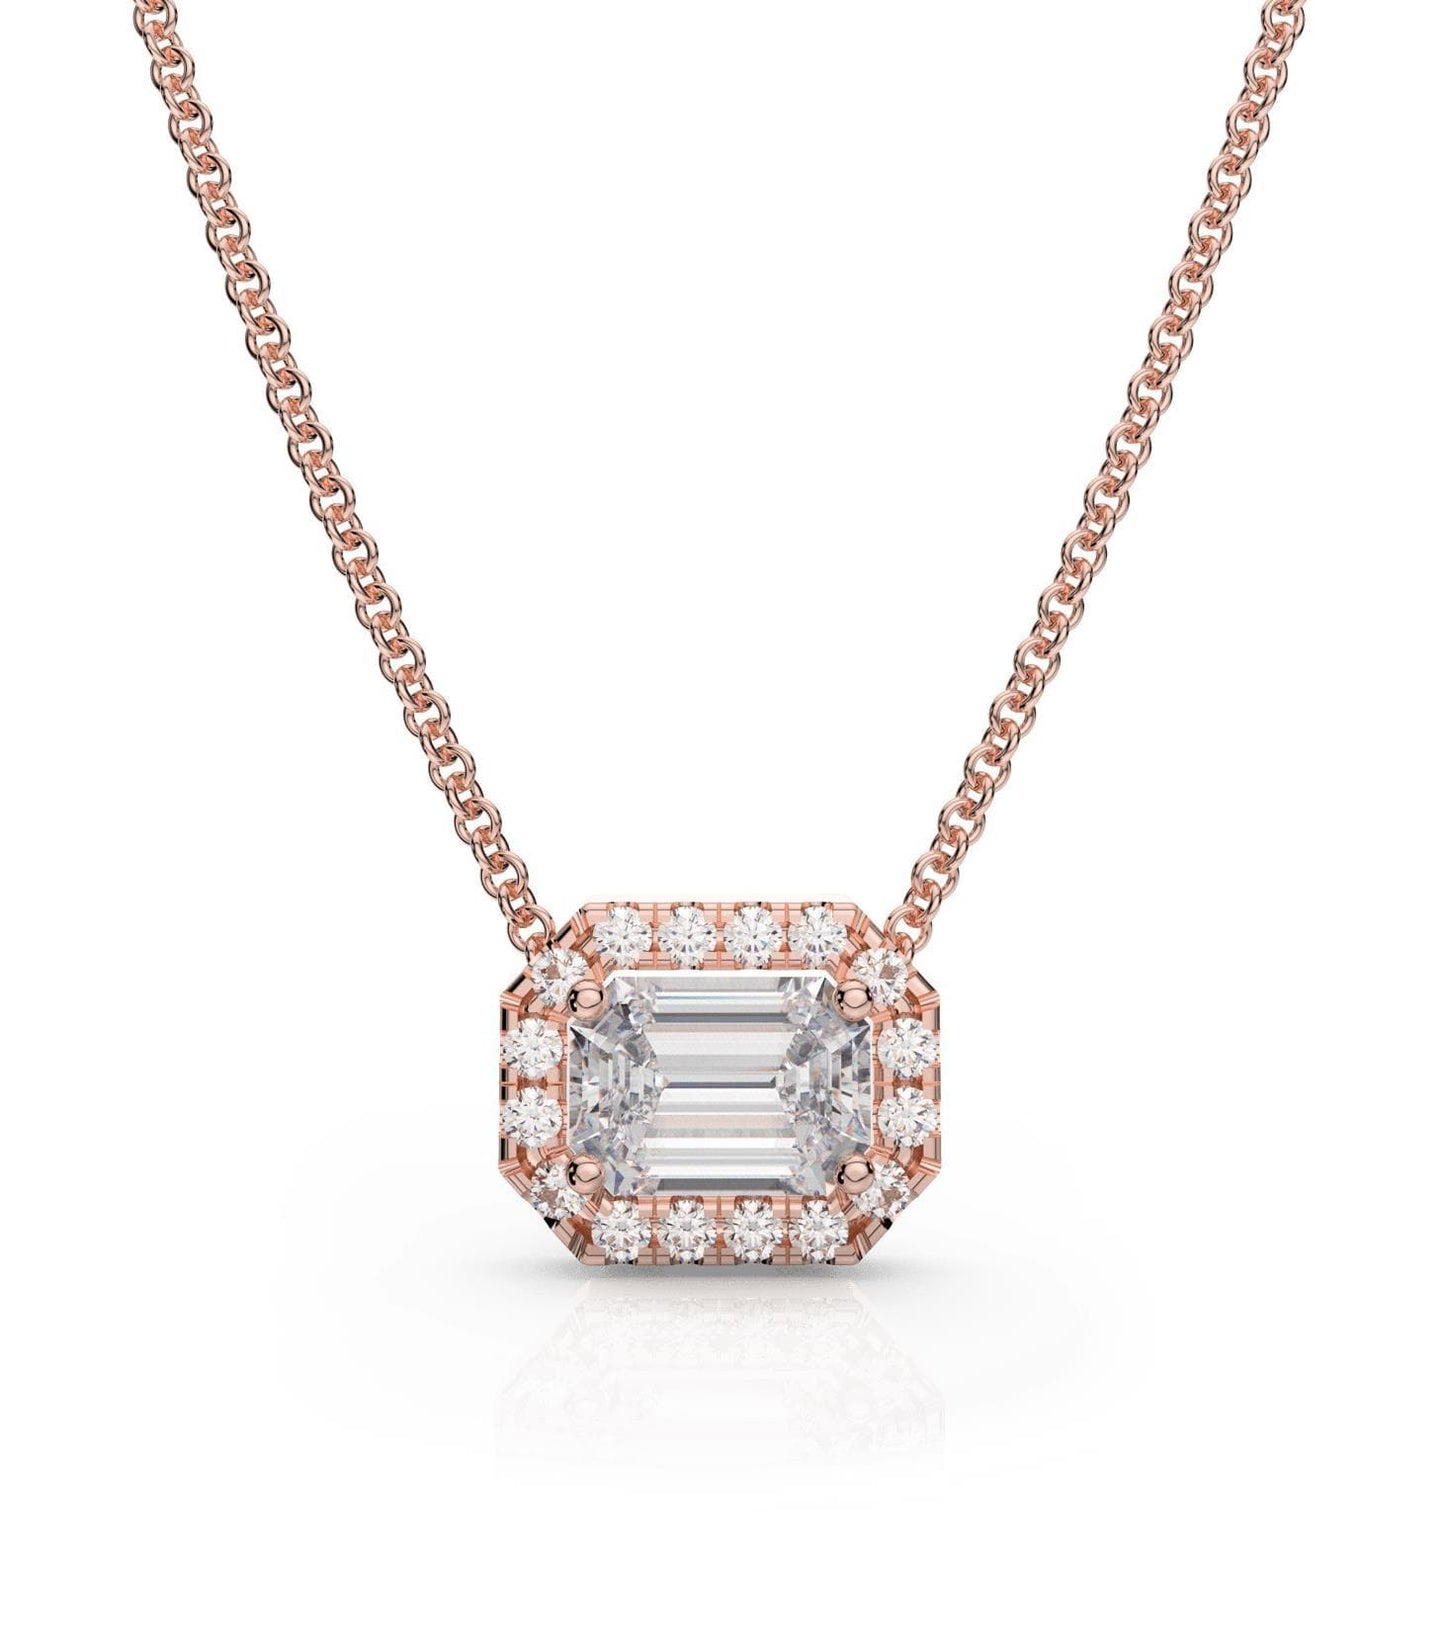 Moissanite and Diamond East-West Emerald Cut Halo Necklace in 14k Gold